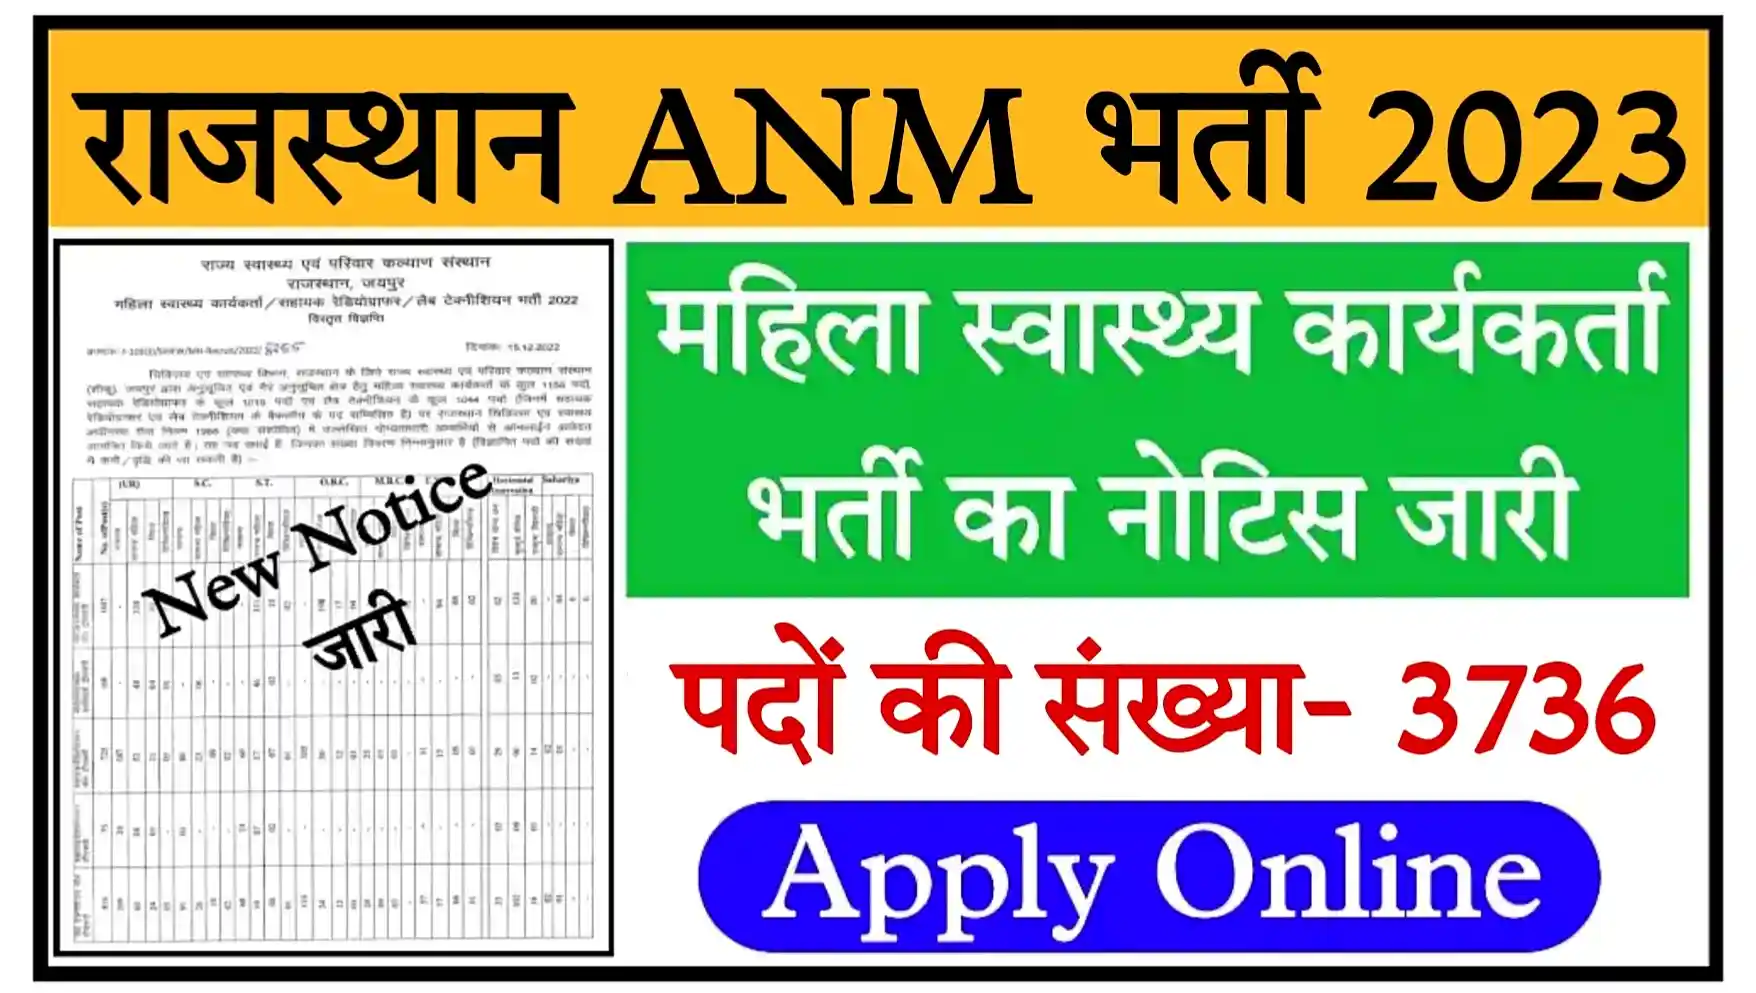 Rajasthan ANM Recruitment 2023 Apply Online For 3736 Posts, Selection Process, Last Date Check All Details